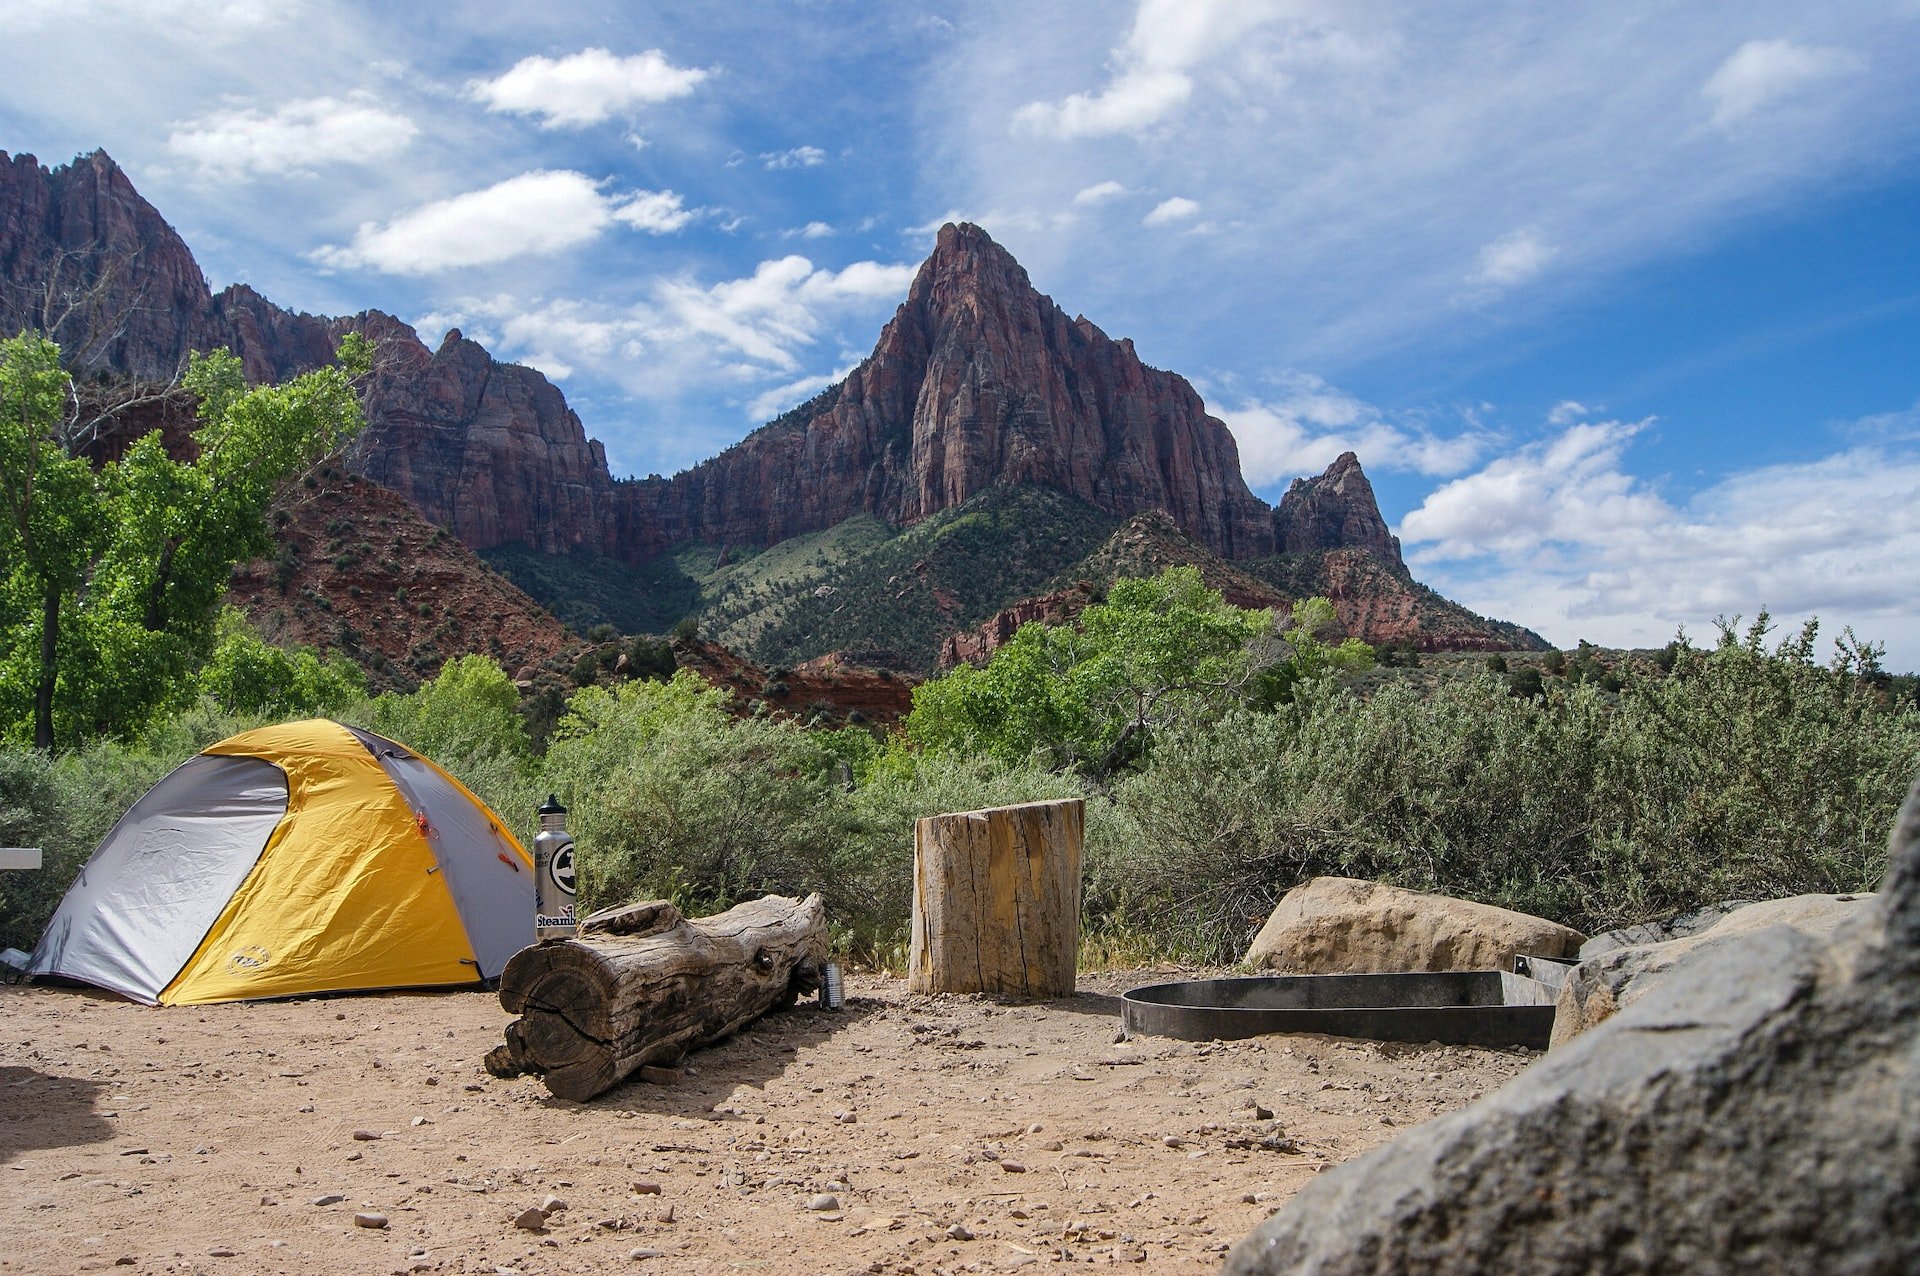 Camping in Zion National Park (photo: Zach Betten)